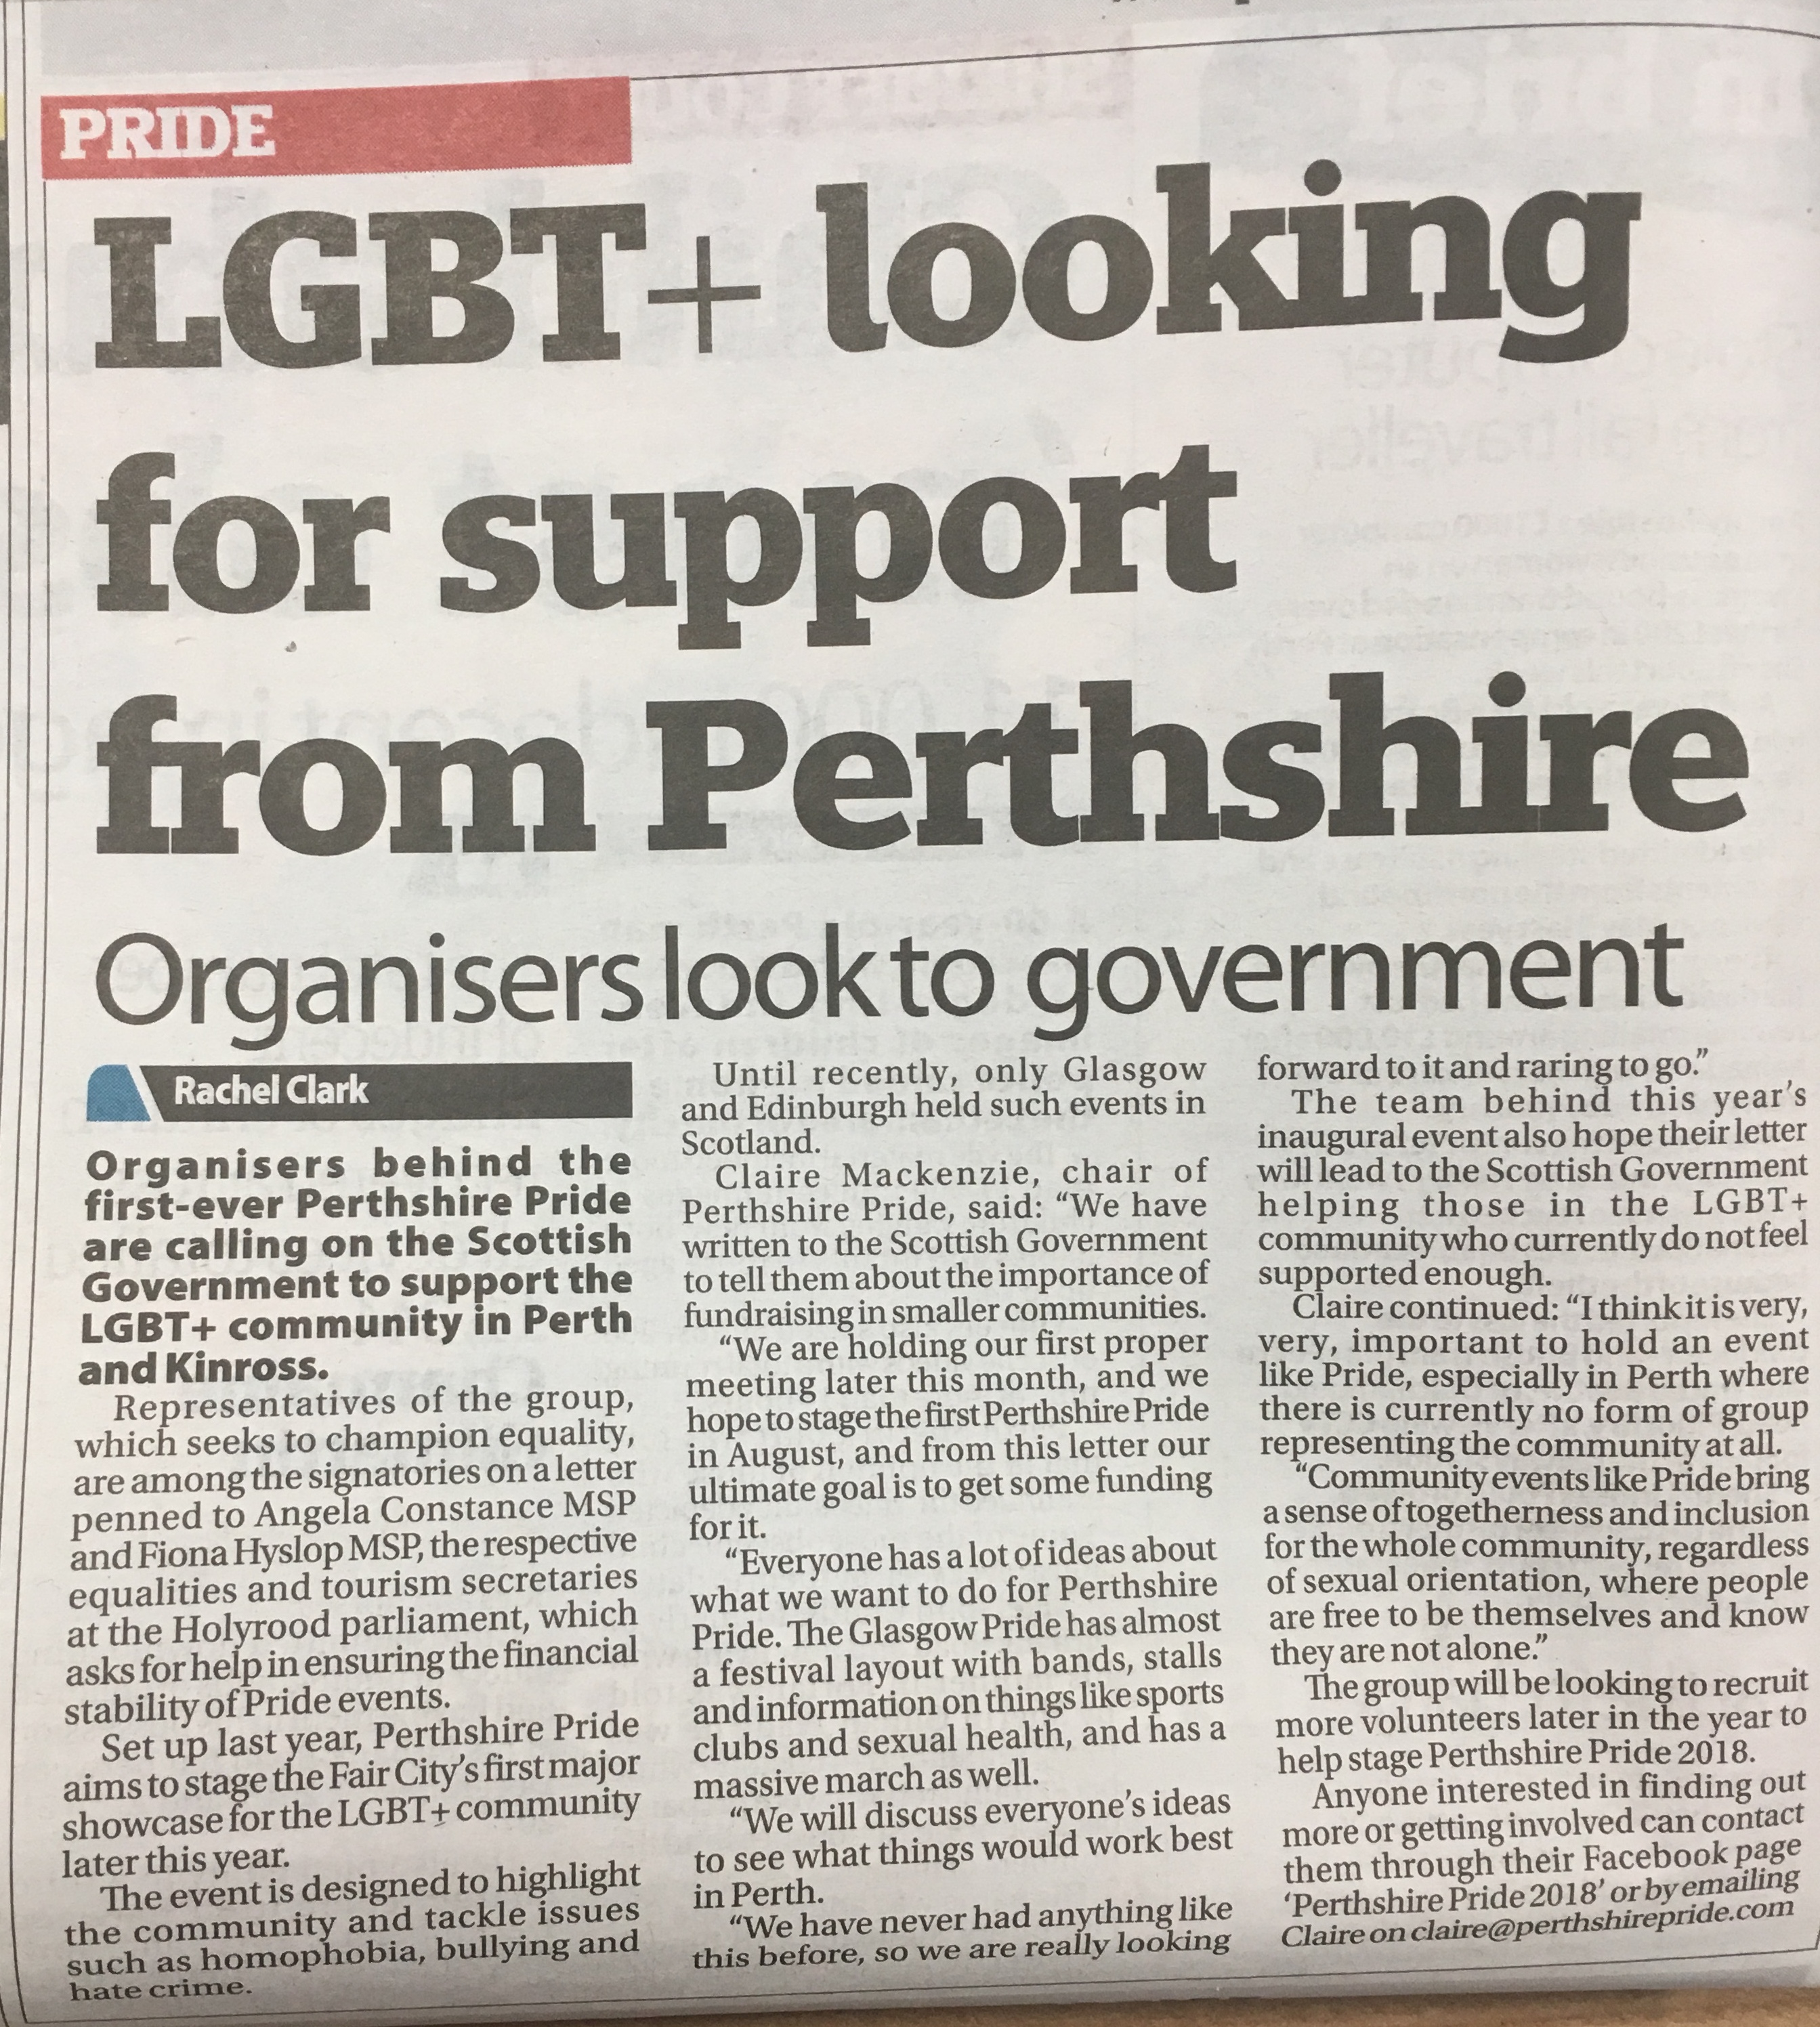 19th January 2018 - Perthshire Pride organisers calling on Scottish Government to support the LGBT+ community in Perth & Kinross.